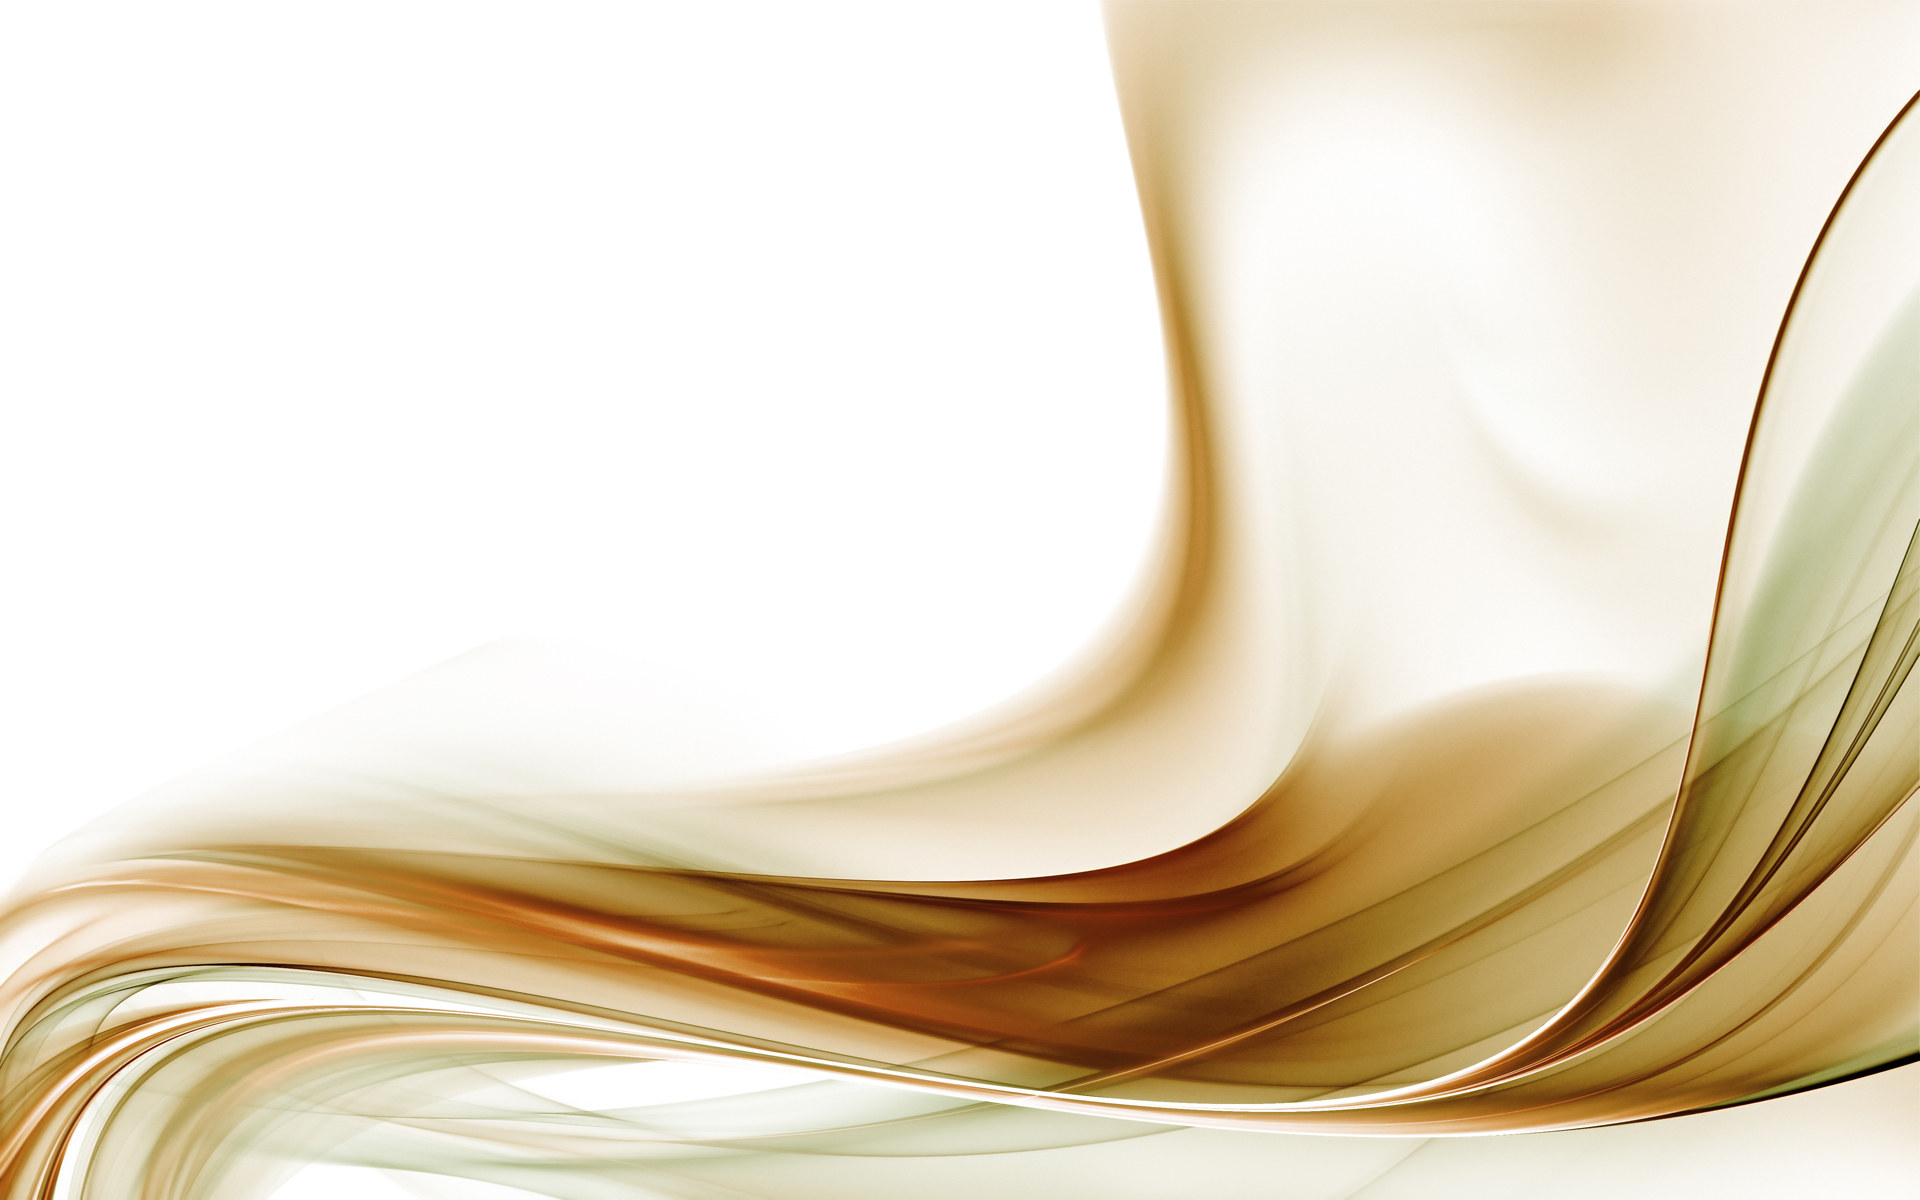 wallpaper 96264 Gold Abstract With White Background HD Wallpaper Image 1920x1200